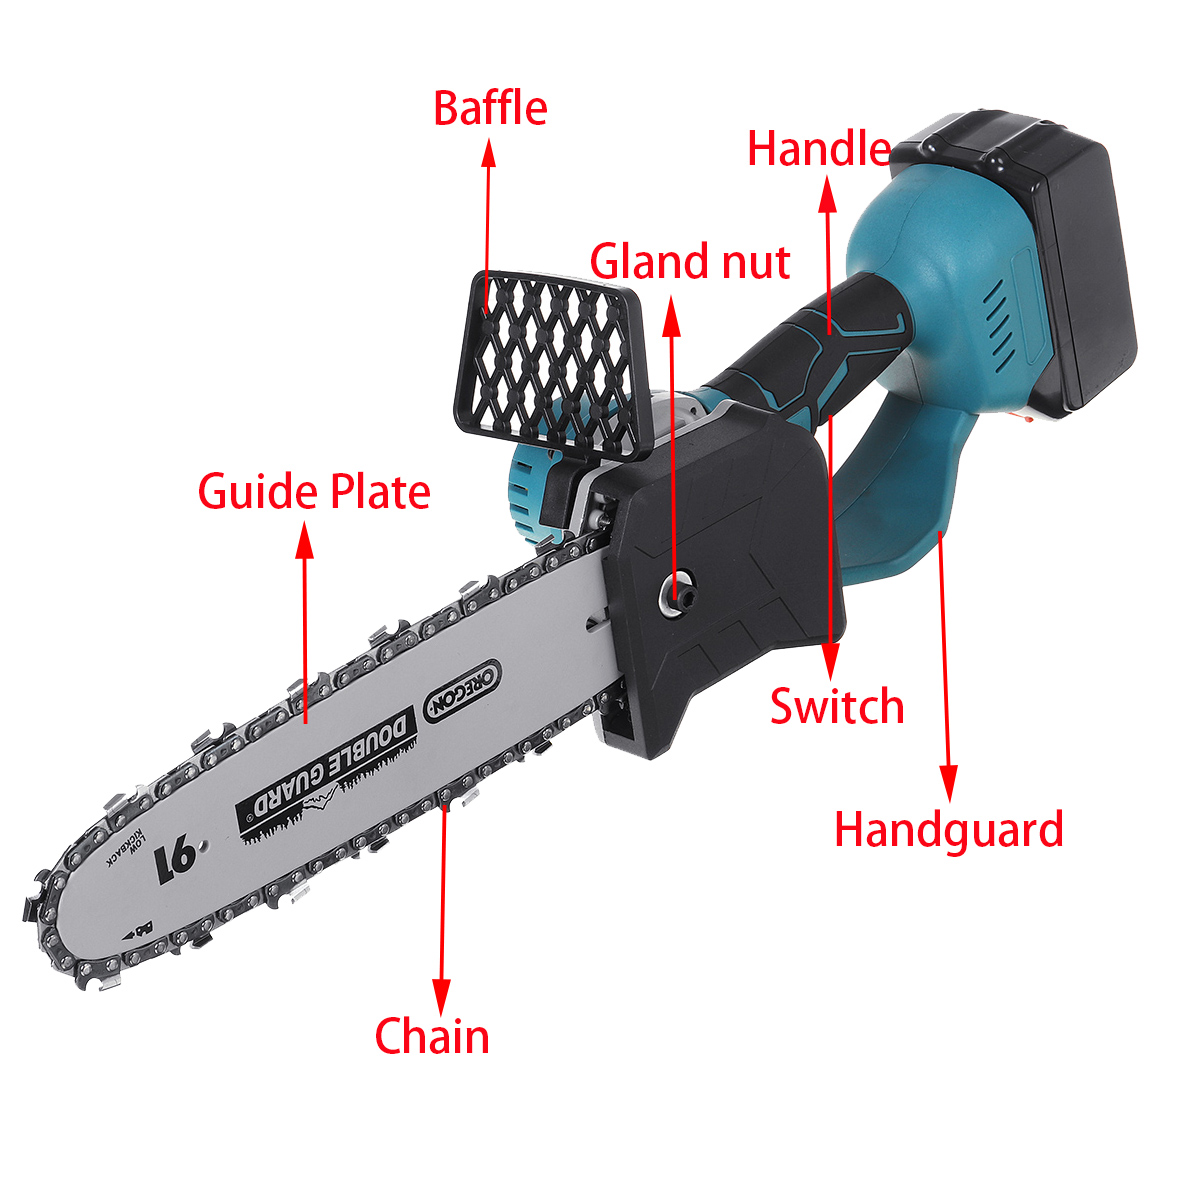 Doersupp-21V-Cordless-Electric-Chain-Saw-Wood-Mini-Cutter-One-Hand-Saw-Woodworking-Tool-1814645-13